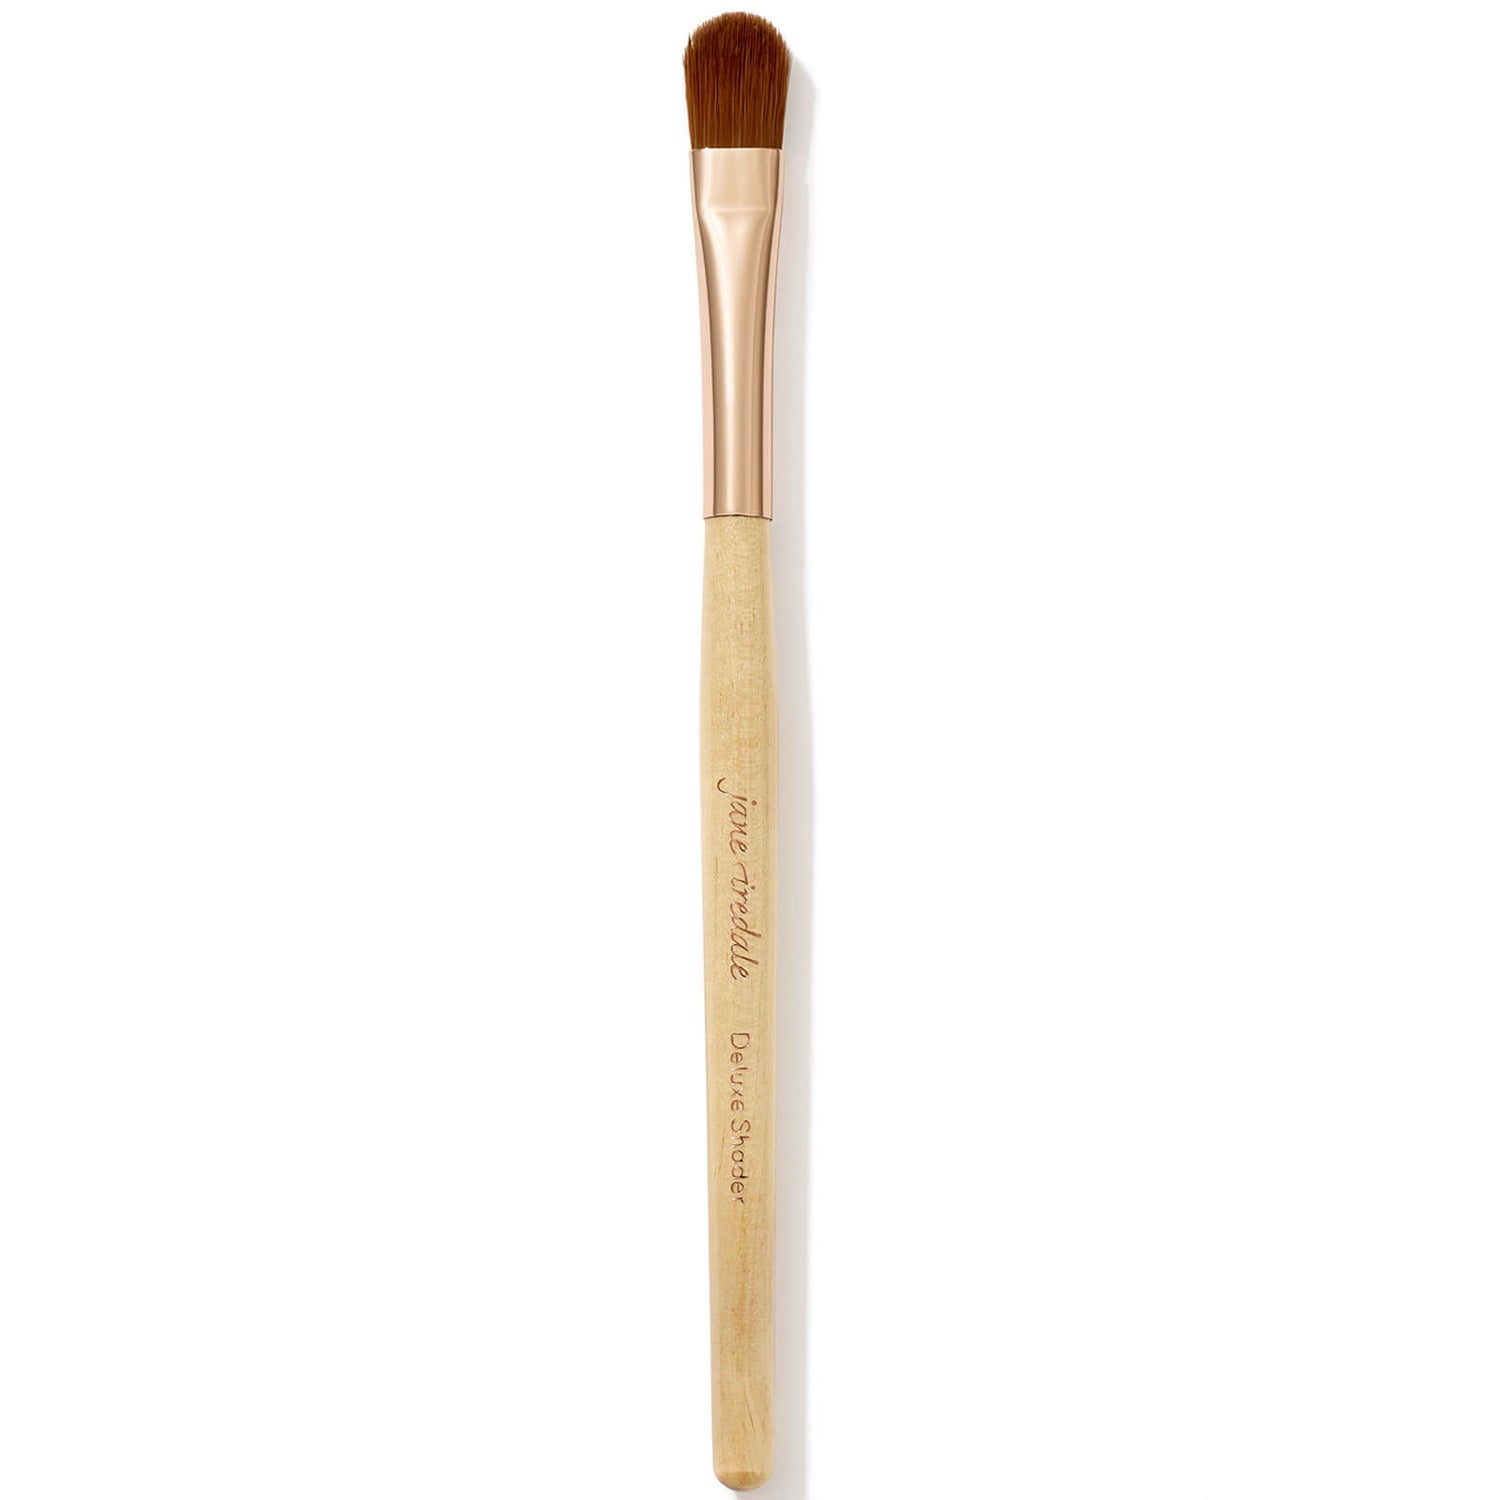 jane iredale Deluxe Shader Brush (1 piece)